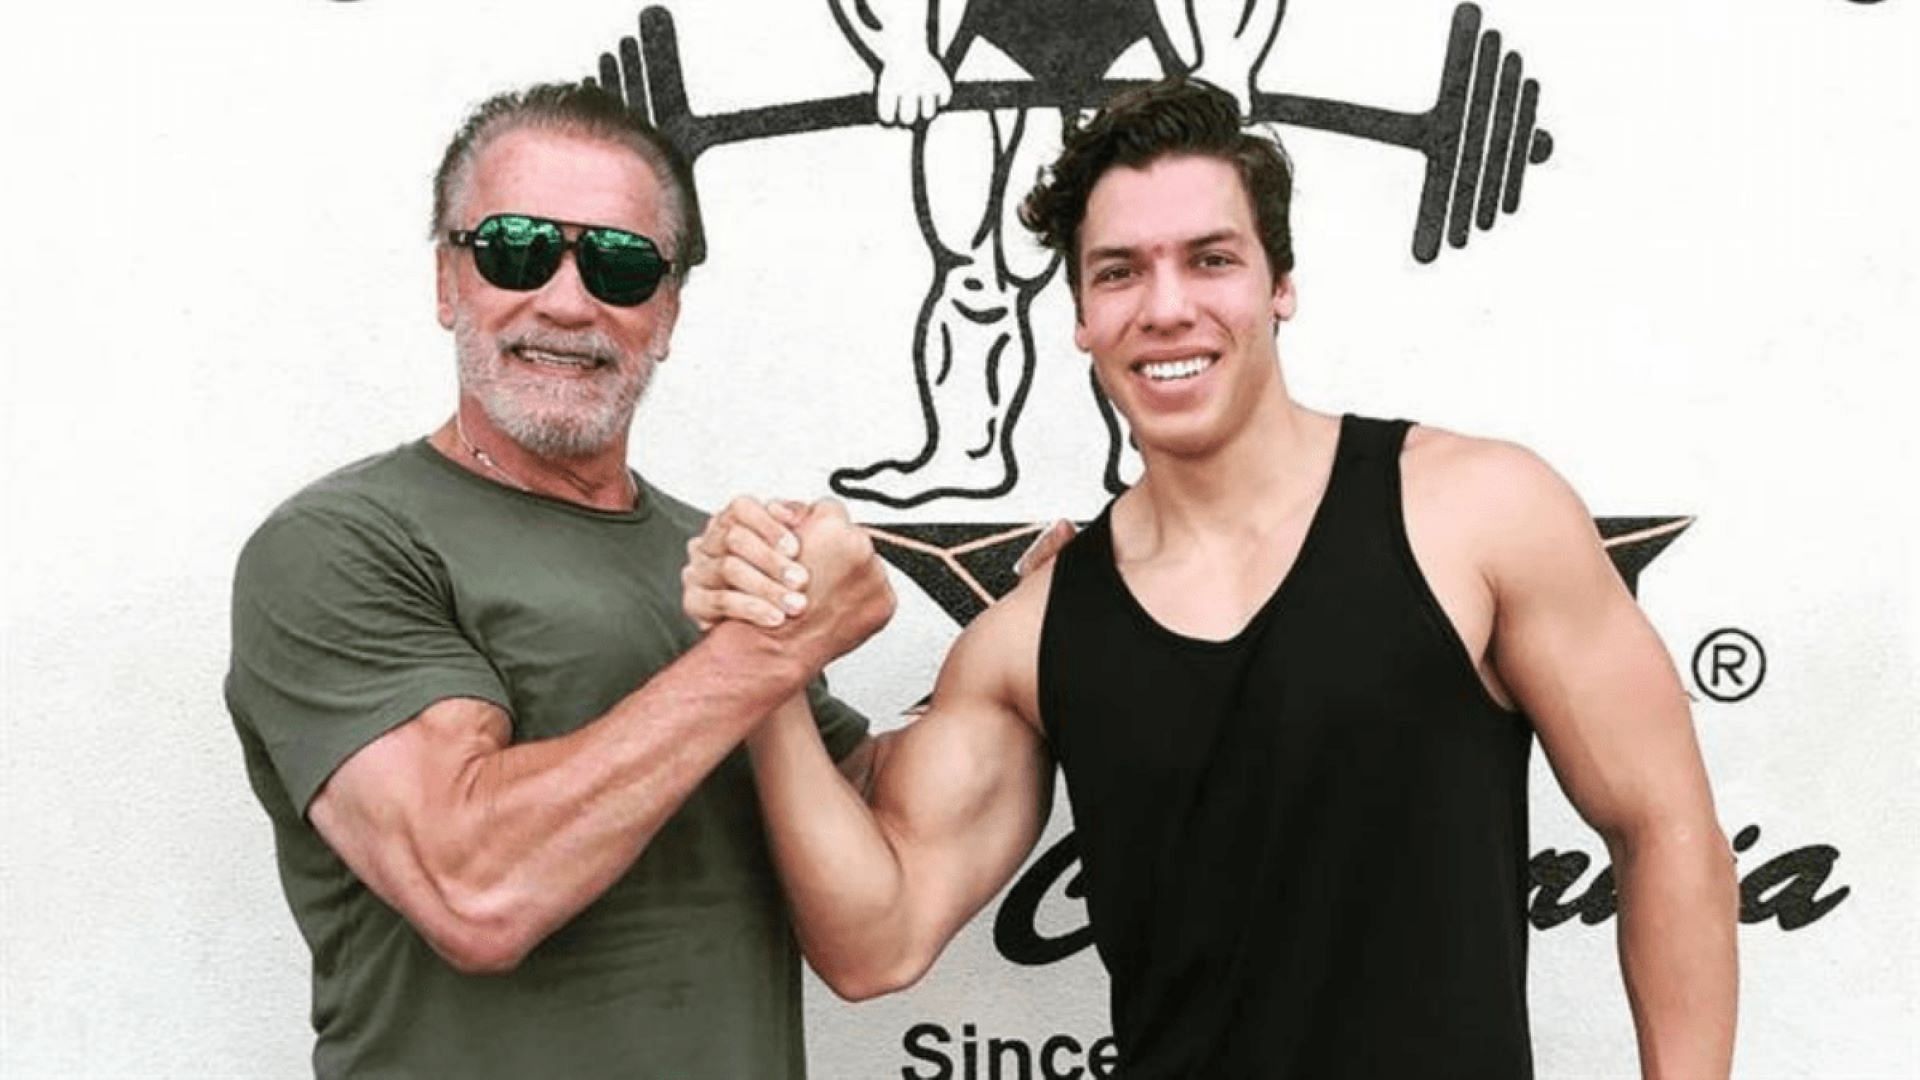 It took a little while for me and him to get really close" - Joseph Baena on his dad Arnold Schwarzenegger